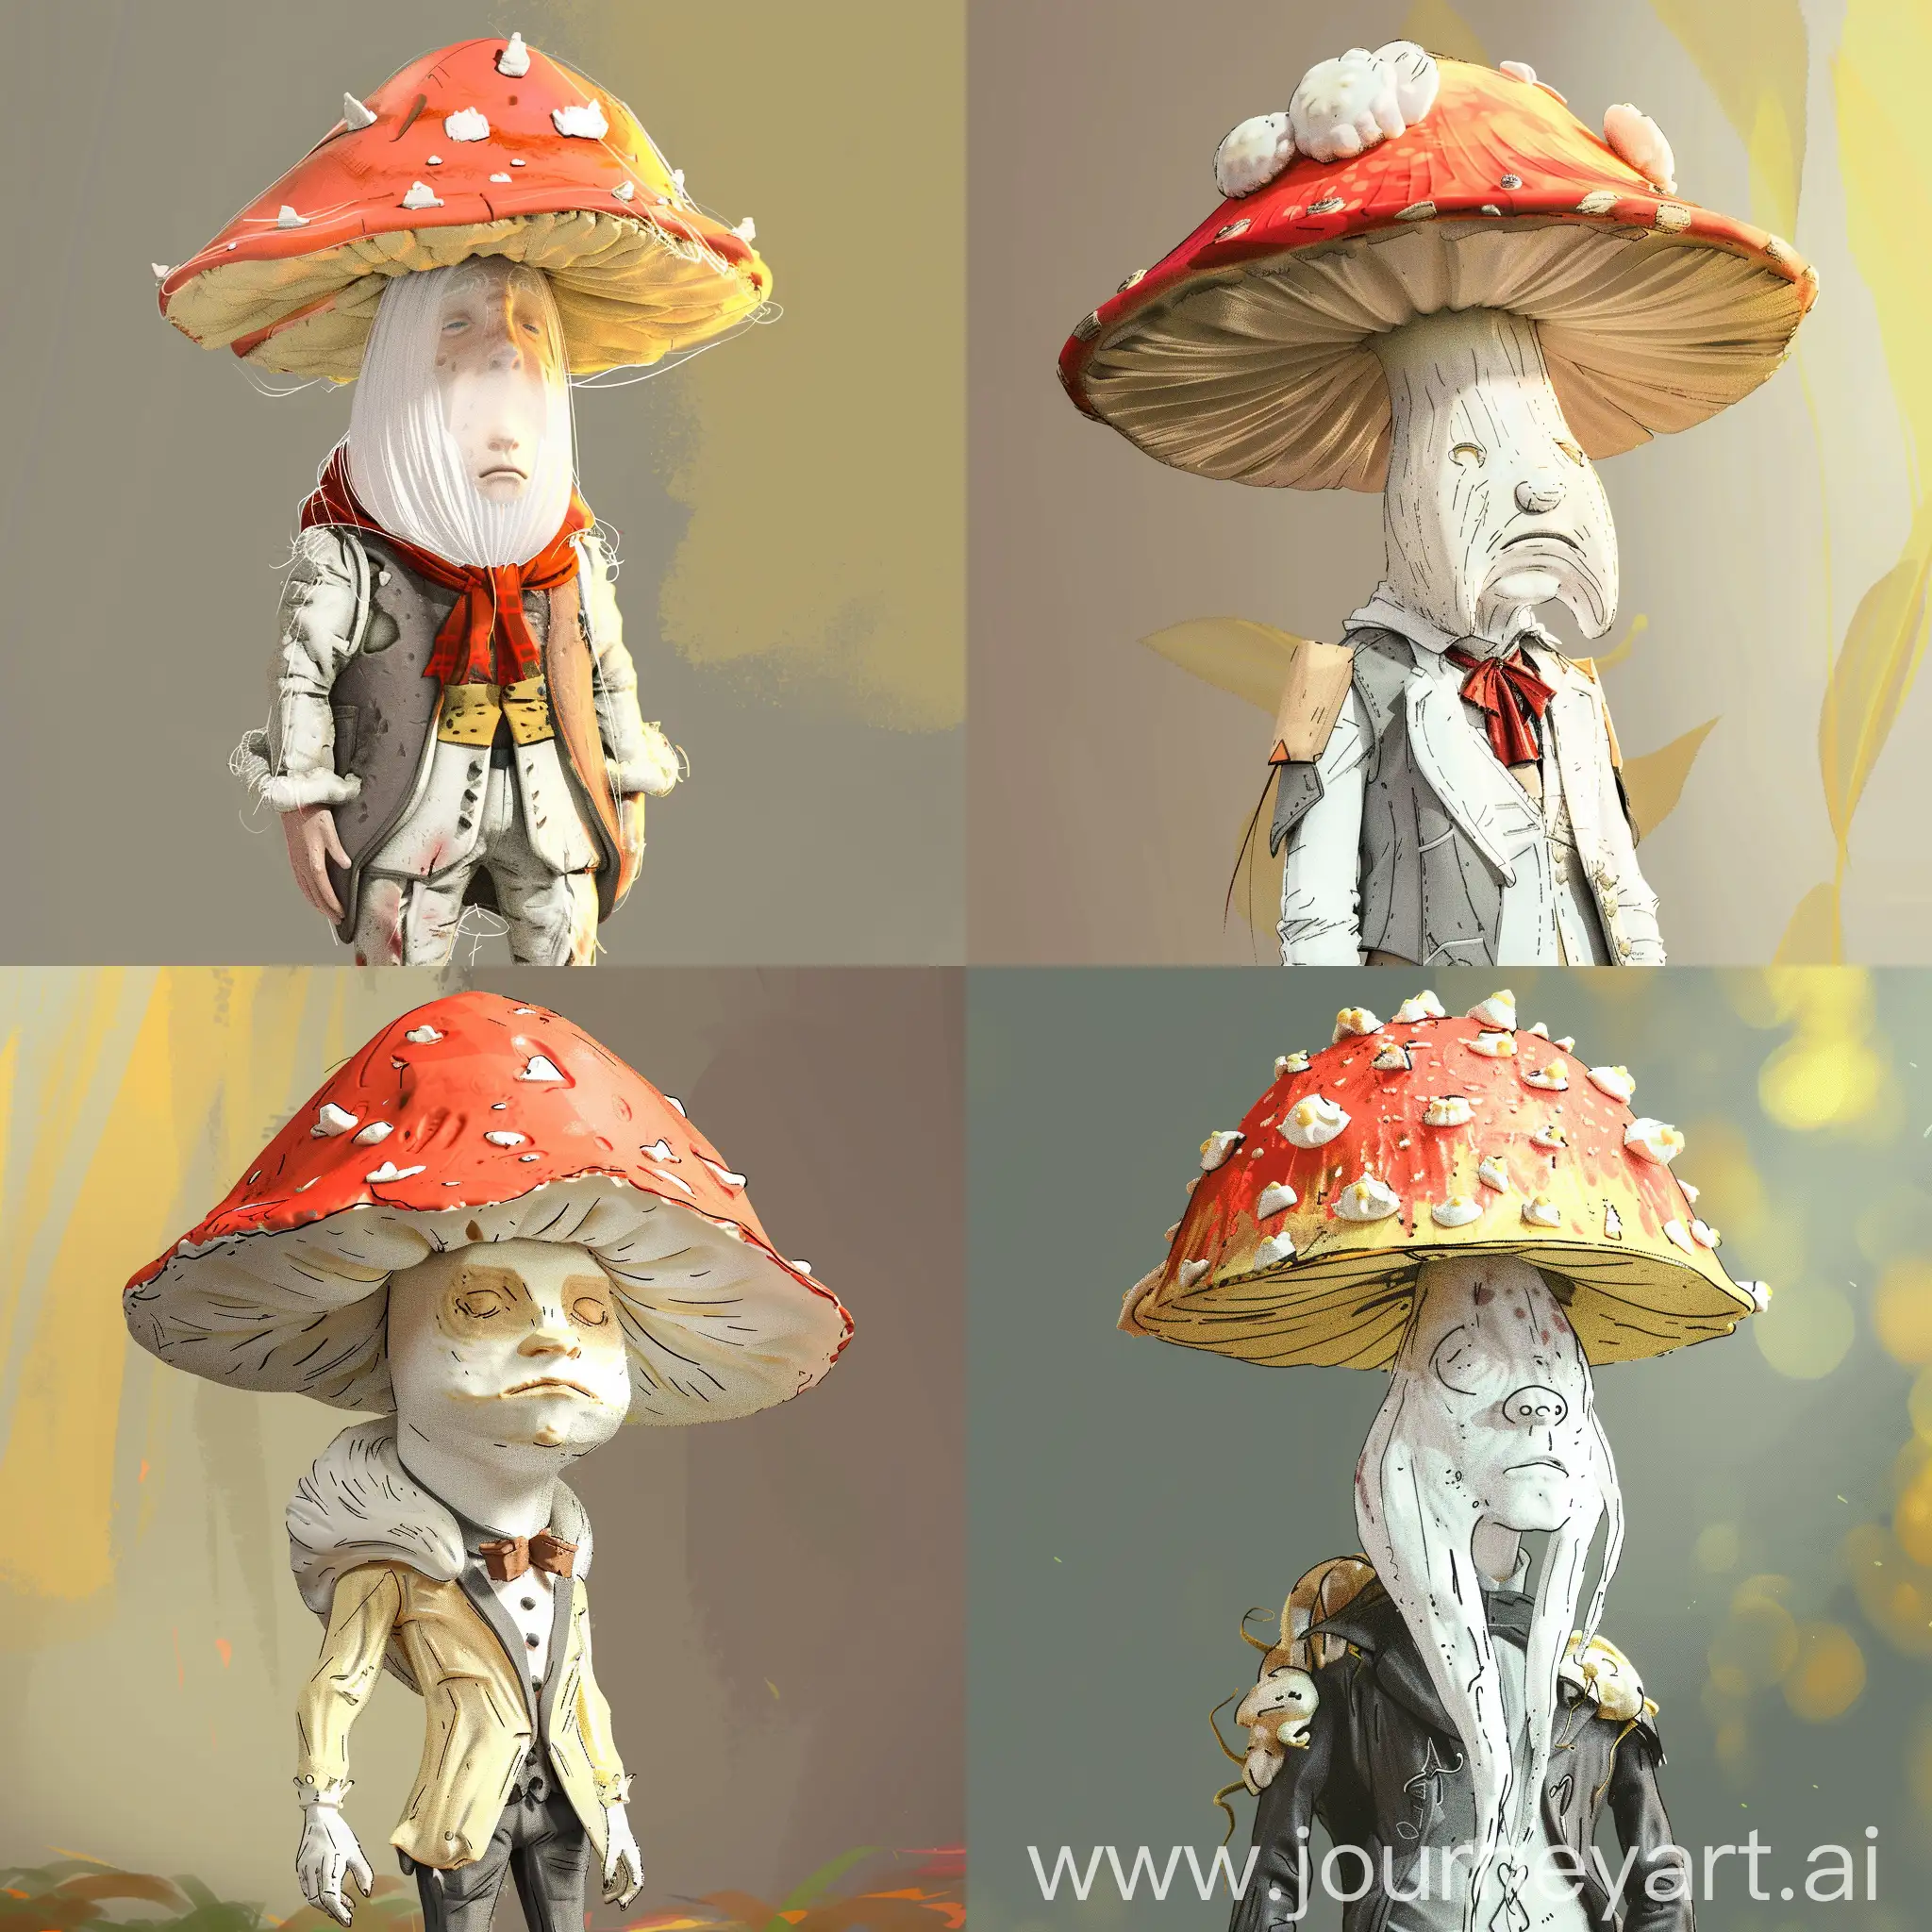 Fantasy-Mushroom-Character-in-League-of-Legends-Style-Costume-with-White-Humita